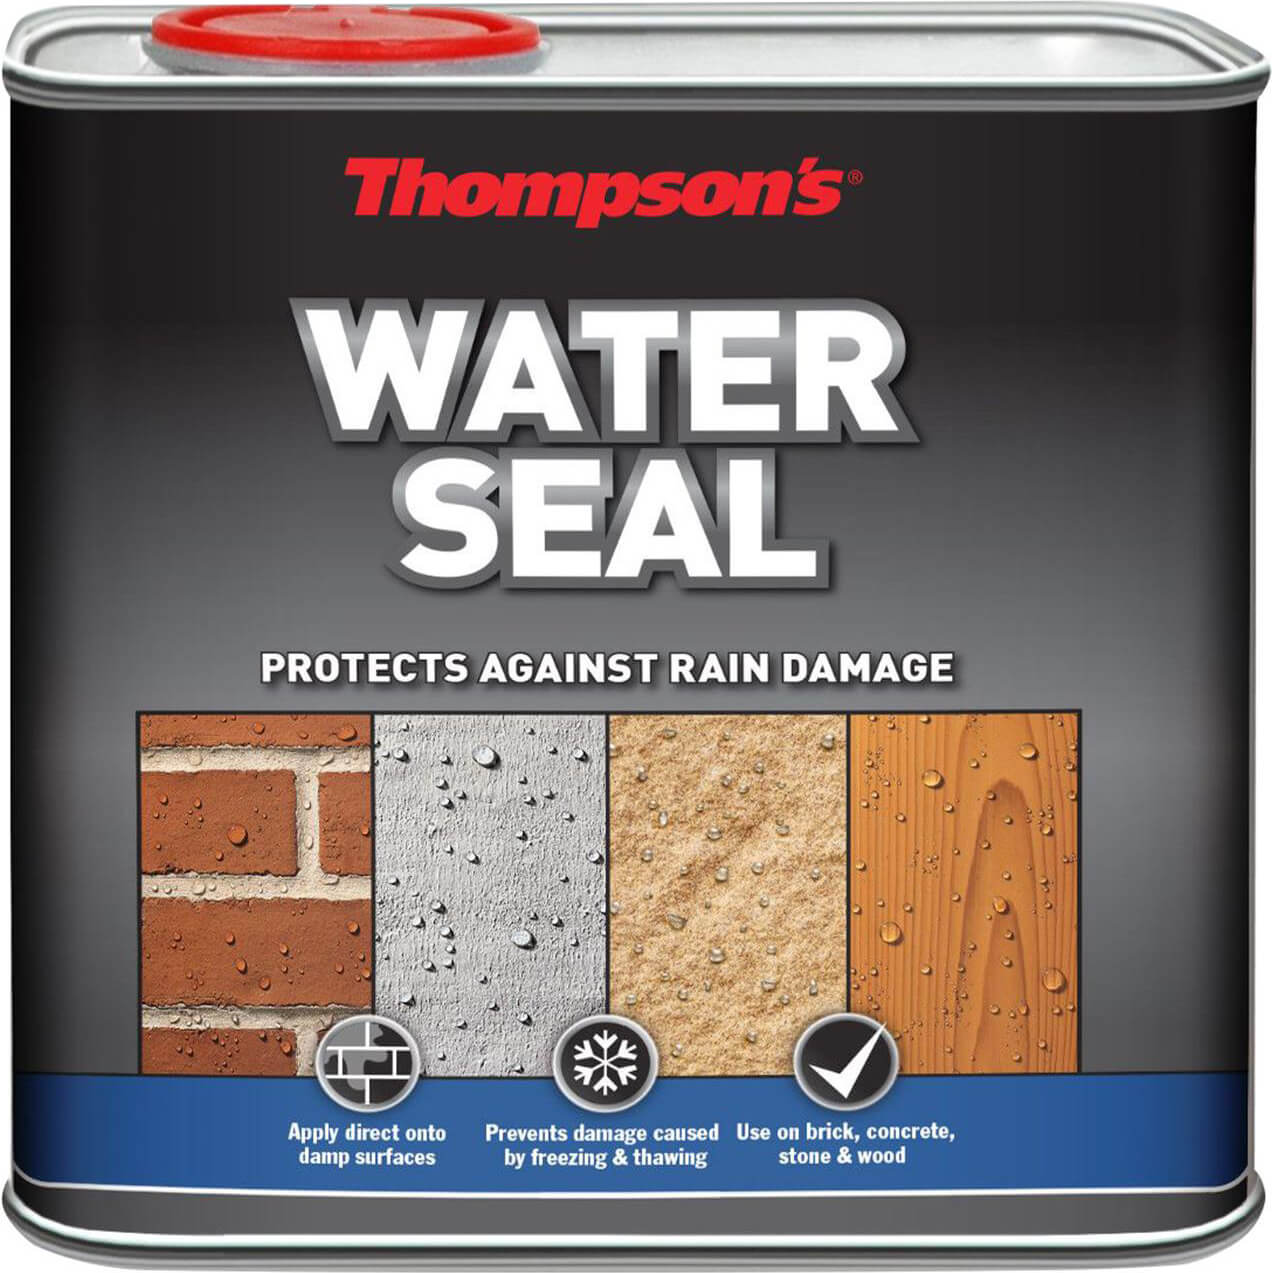 Ronseal Thompsons Water Seal 2.5l